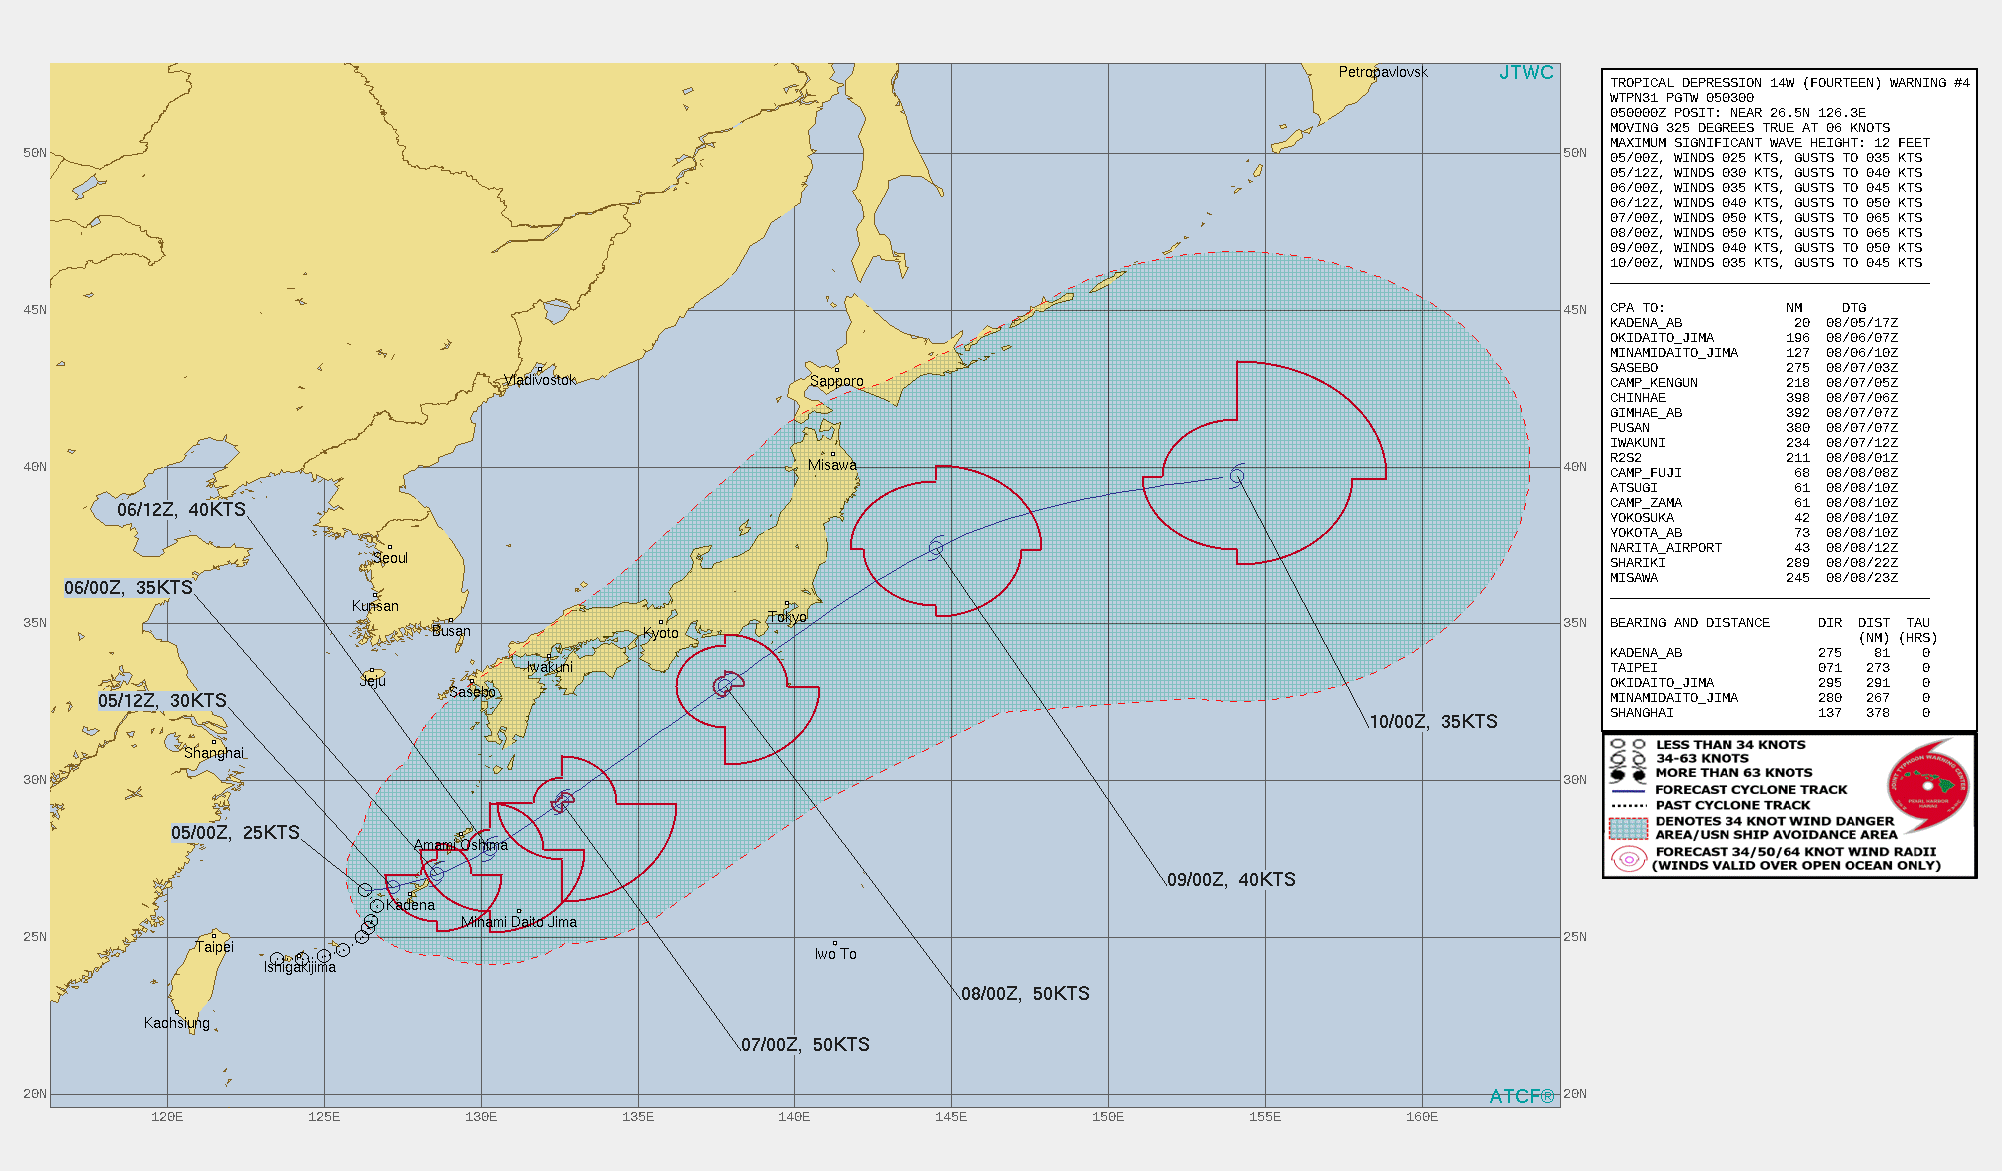 TD 14W. WARNING 4 ISSUED AT 05/03UTC.THERE ARE NO SIGNIFICANT CHANGES TO THE FORECAST FROM THE PREVIOUS WARNING.  FORECAST DISCUSSION: TD 14W HAS REMAINED QUASI-STATIONARY OVER THE PAST 12 HOURS WITH A BROAD, ILL-DEFINED LOW-LEVEL CIRCULATION CENTER. THUS, THERE IS SIGNIFICANT UNCERTAINTY IN THE POSITION AND TRACK MOTION. DUE TO THE COMPETING STEERING INFLUENCES, THERE IS MEDIUM CONFIDENCE WITH THE SYSTEM EXPECTED TO REMAIN SLOW MOVING AND ERRATIC. AFTER TAU 24, THE STR TO THE NORTH SHOULD WEAKEN IN RESPONSE TO AN APPROACHING SHORTWAVE TROUGH ALLOWING THE SYSTEM TO SLOWLY TRACK EAST-NORTHEASTWARD TO NORTHEASTWARD TOWARD THE KANTO PLAIN REGION OF CENTRAL JAPAN. TD 14W SHOULD GRADUALLY INTENSIFY TO A PEAK INTENSITY OF 50 KNOTS BY TAU 48 WITH GRADUAL WEAKENING AFTER TAU 72. AFTER TAU 96, TD 14W WILL BEGIN EXTRA-TROPICAL TRANSITION (ETT) AS IT INTERACTS WITH THE WESTERLIES AND THE BAROCLINIC ZONE. TD 14W SHOULD COMPLETE ETT BY TAU 120 AS IT GAINS FRONTAL CHARACTERISTICS.